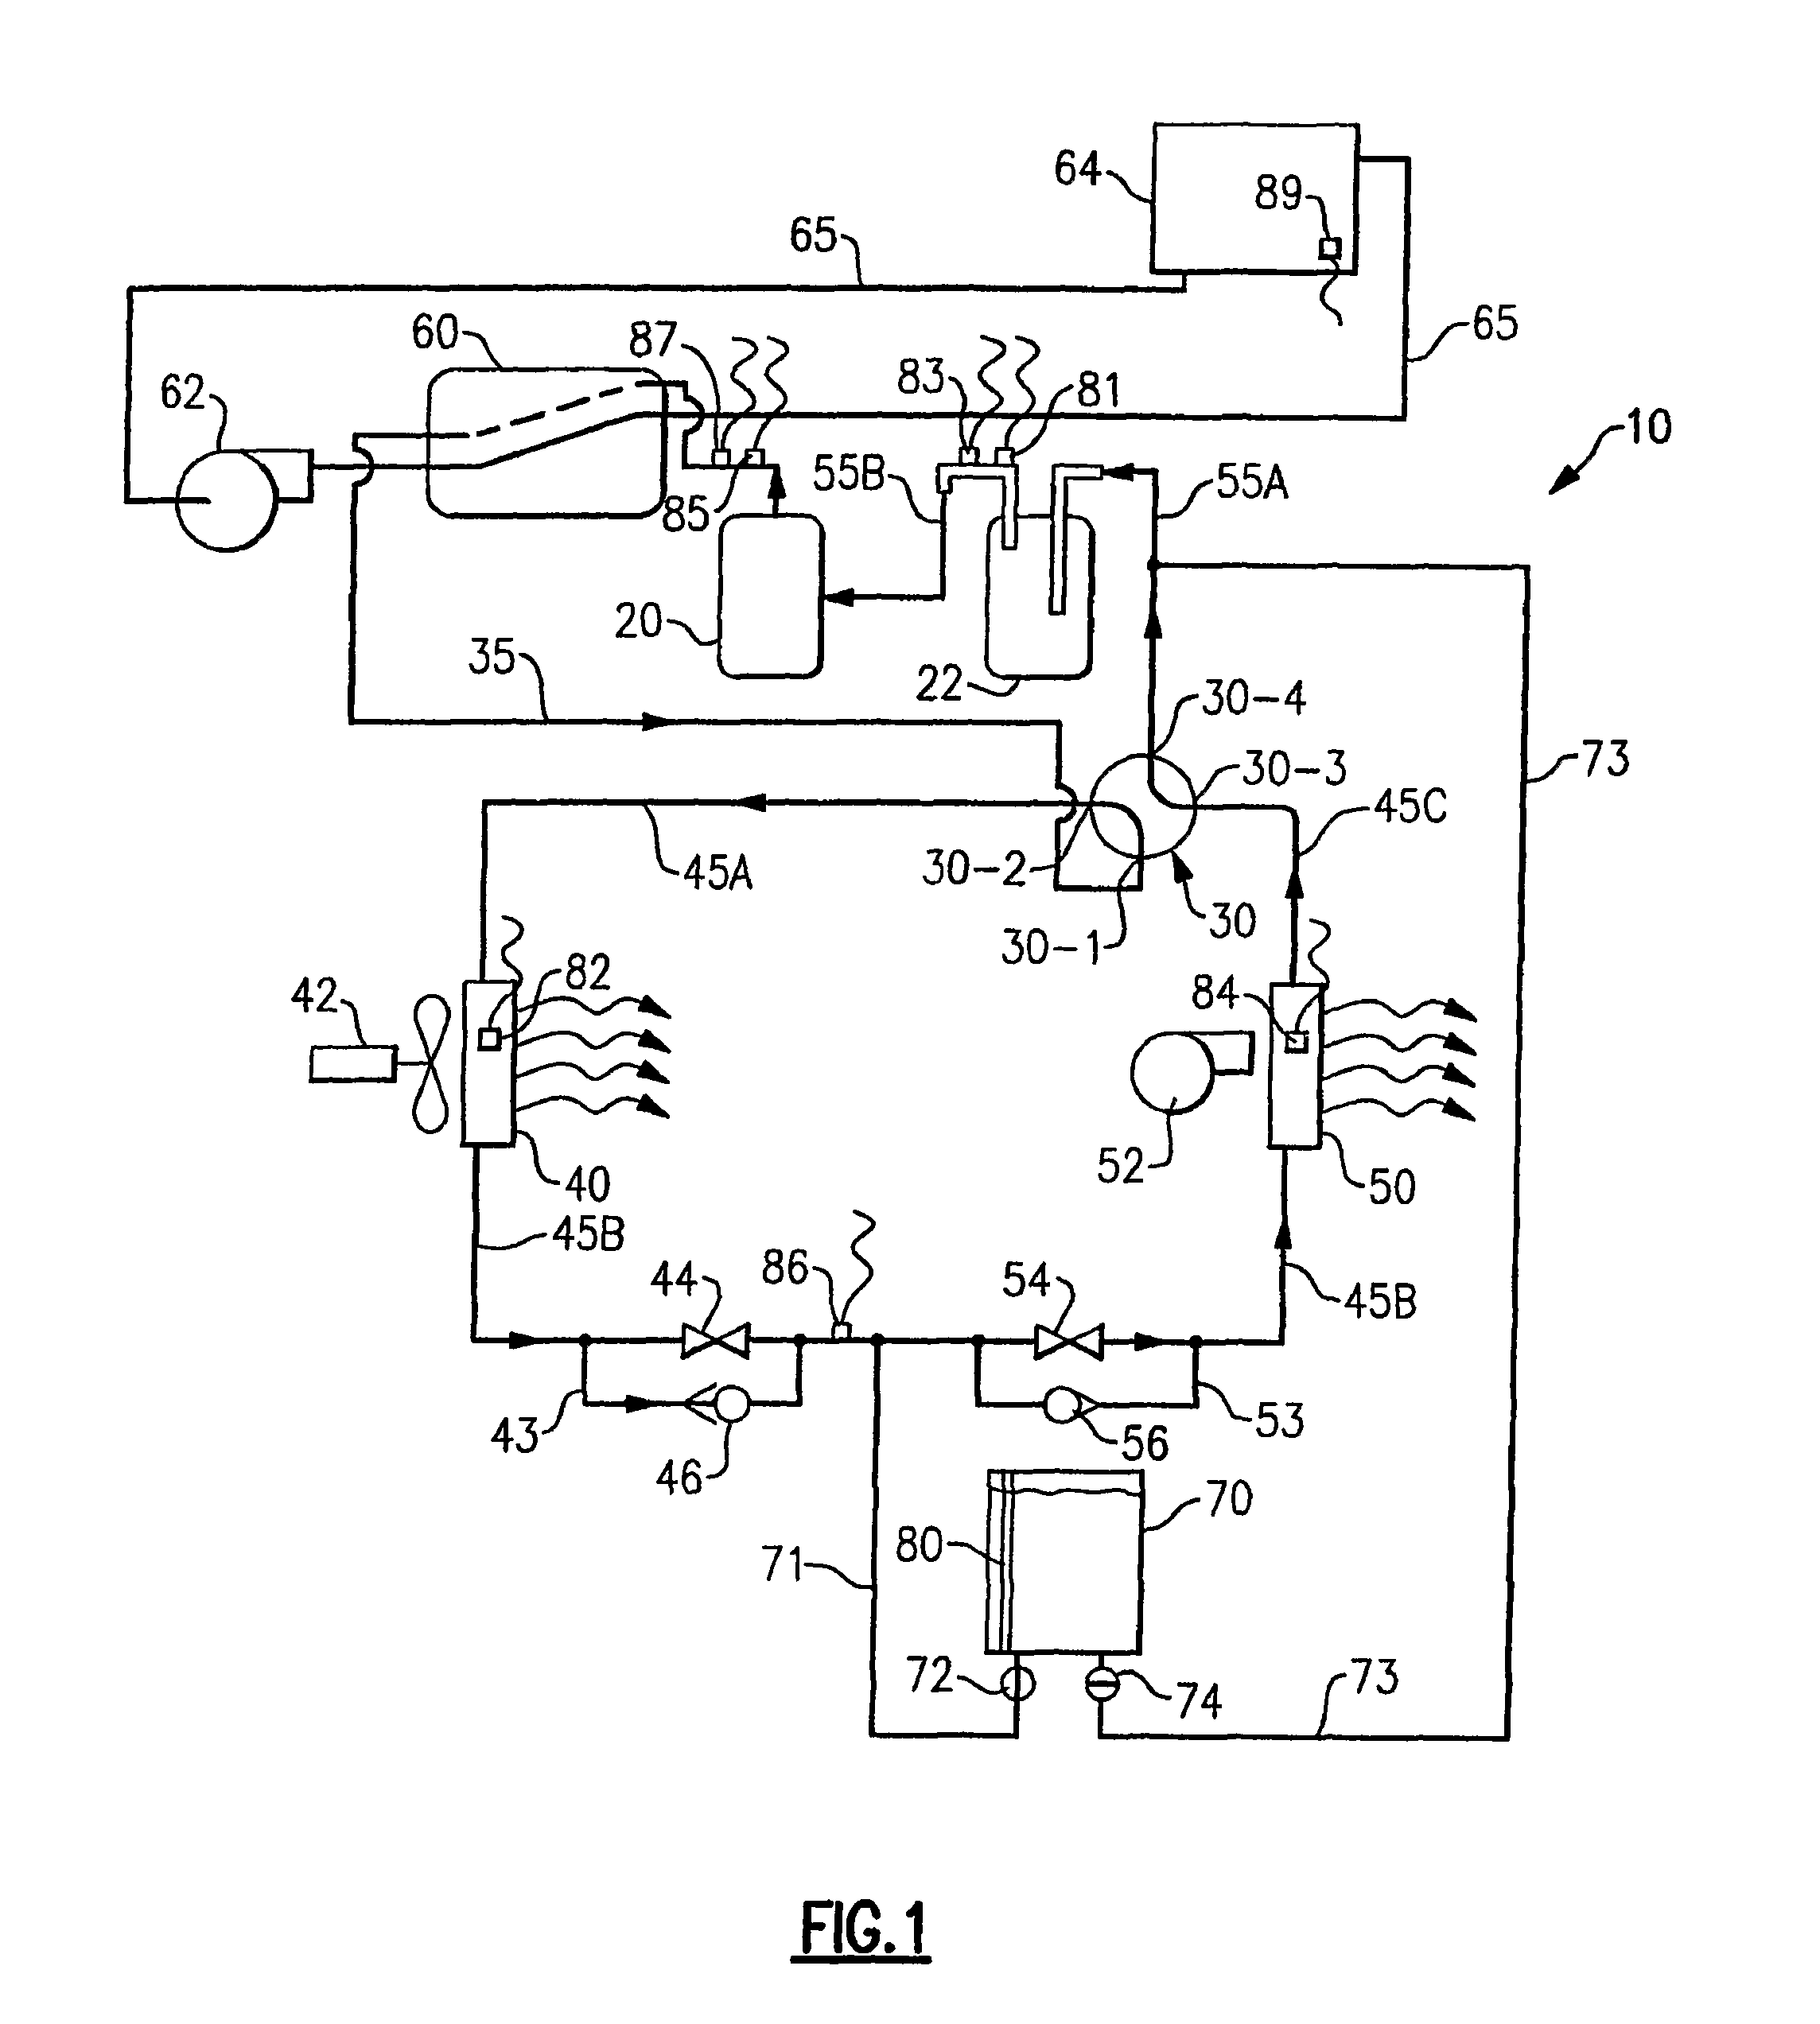 Refrigerant charge control in a heat pump system with water heater